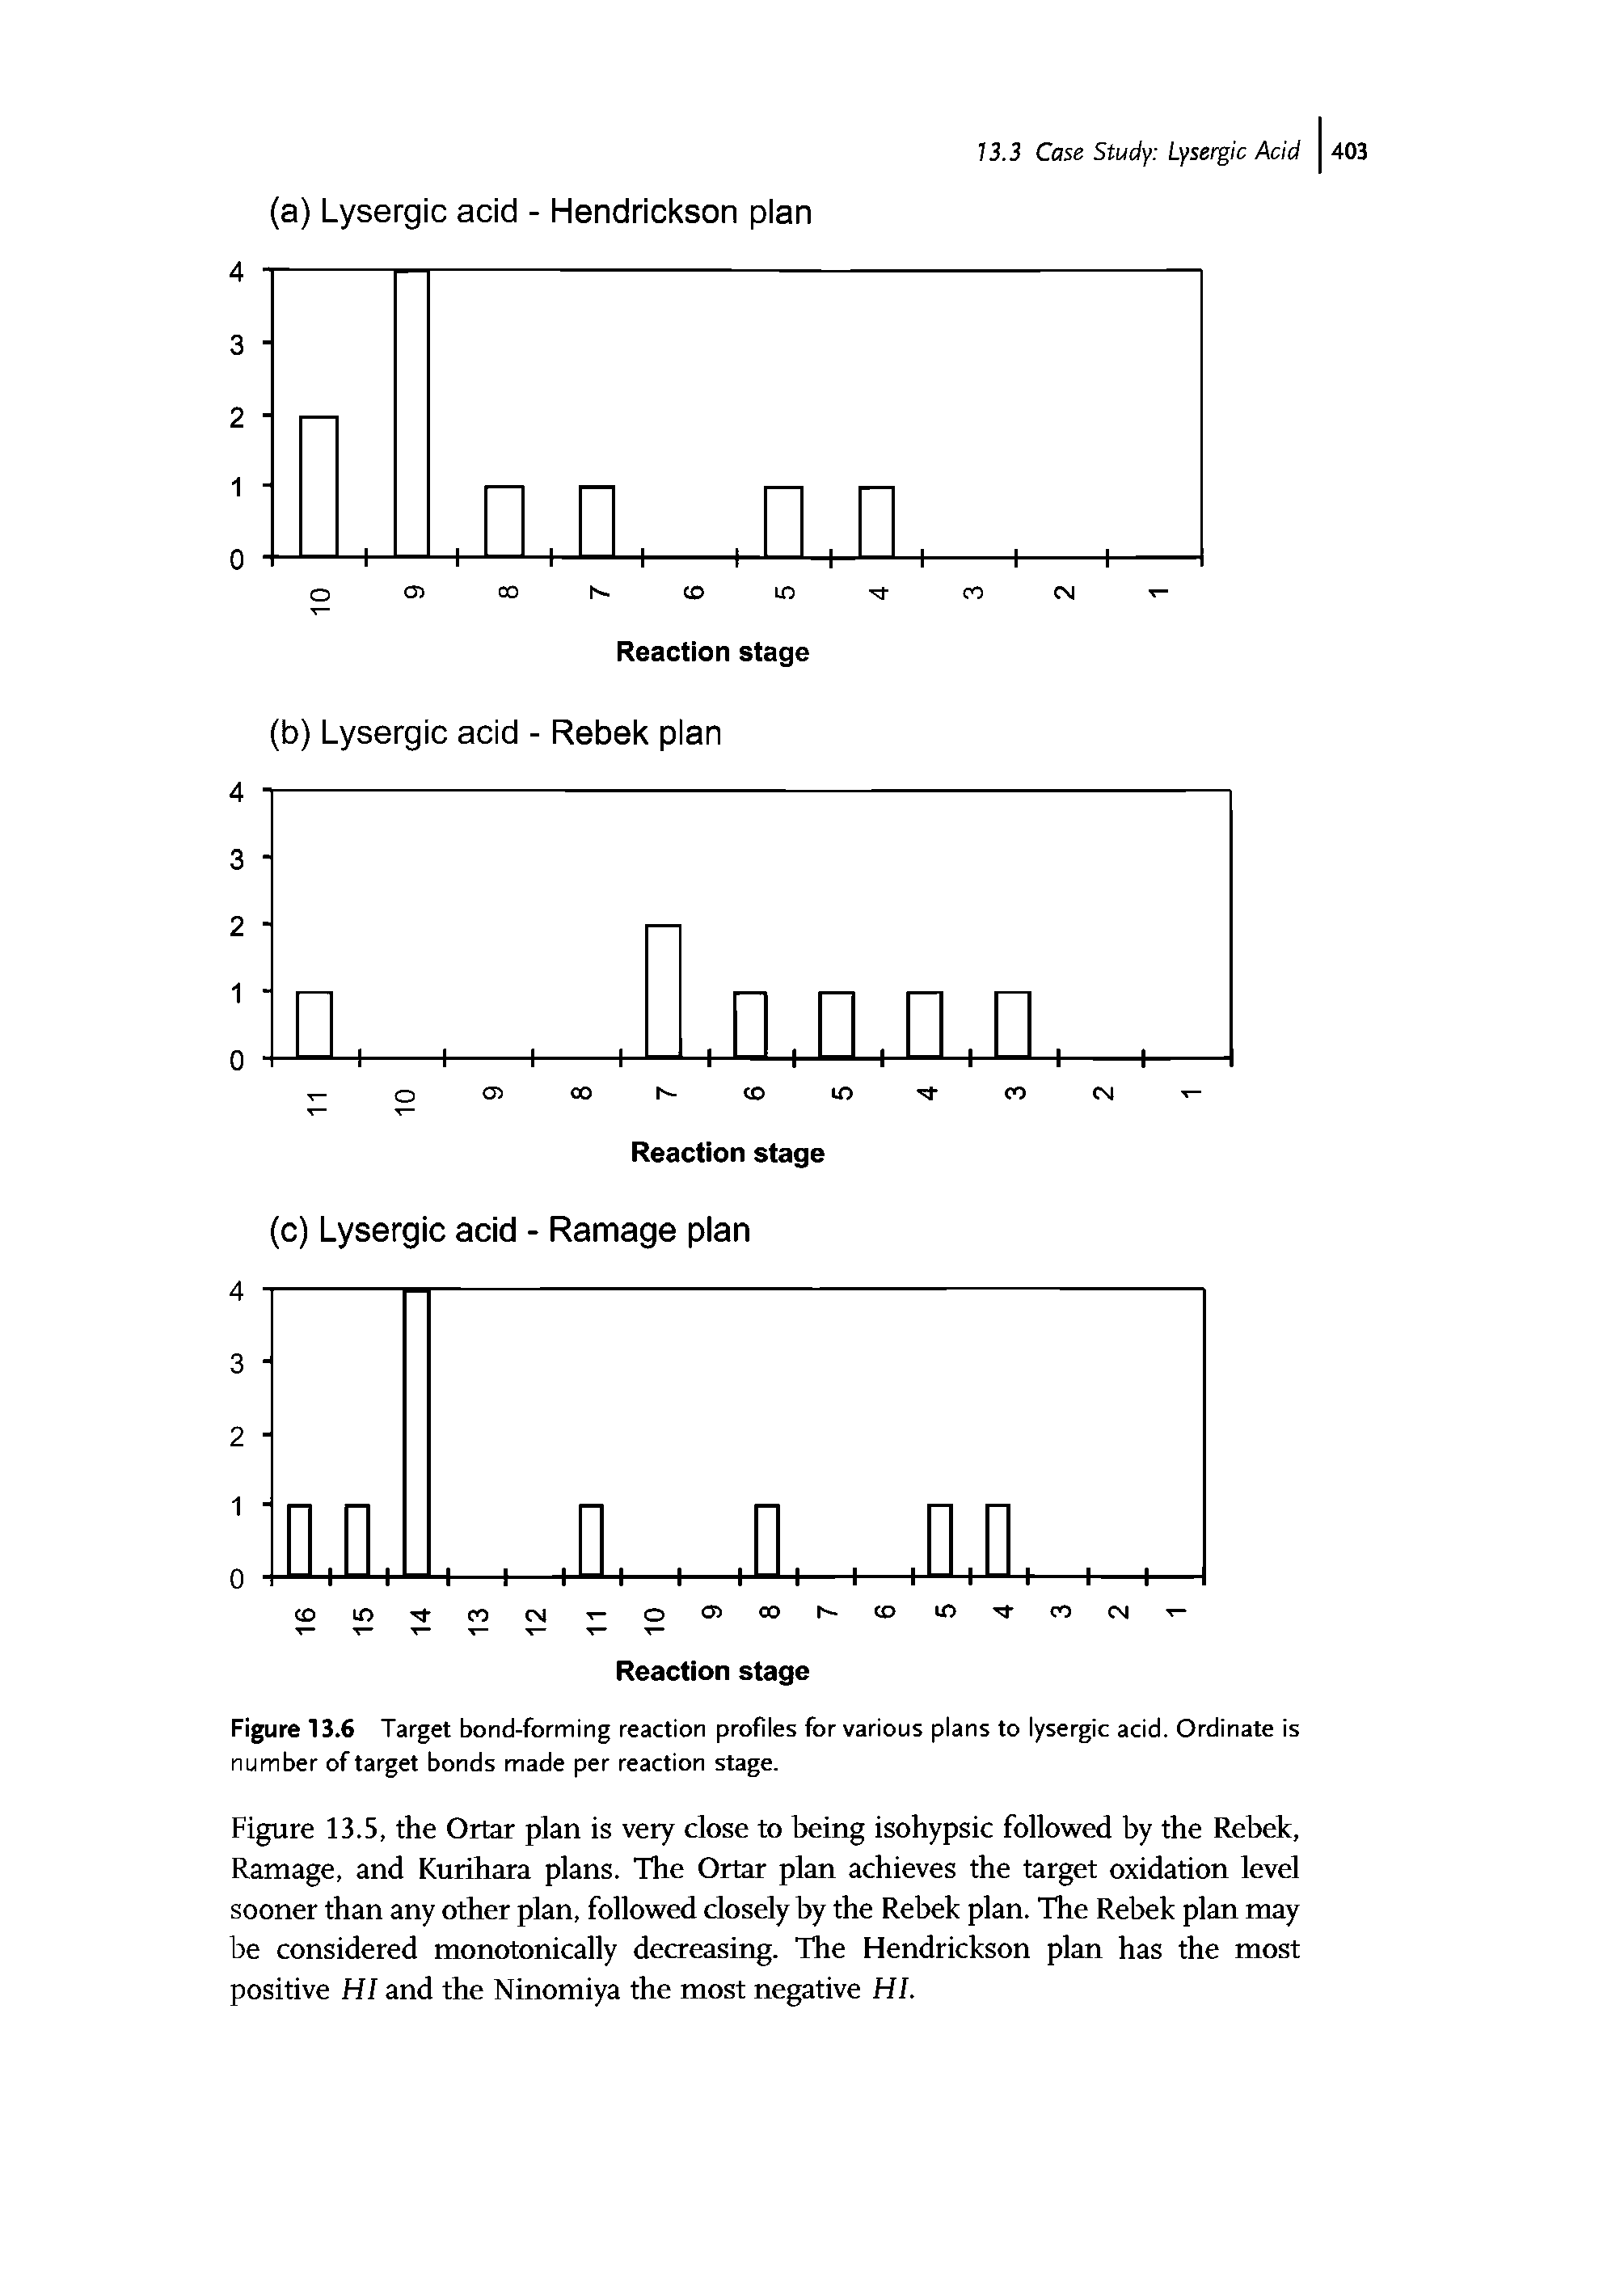 Figure 13.6 Target bond-forming reaction profiles for various plans to lysergic acid. Ordinate is number of target bonds made per reaction stage.